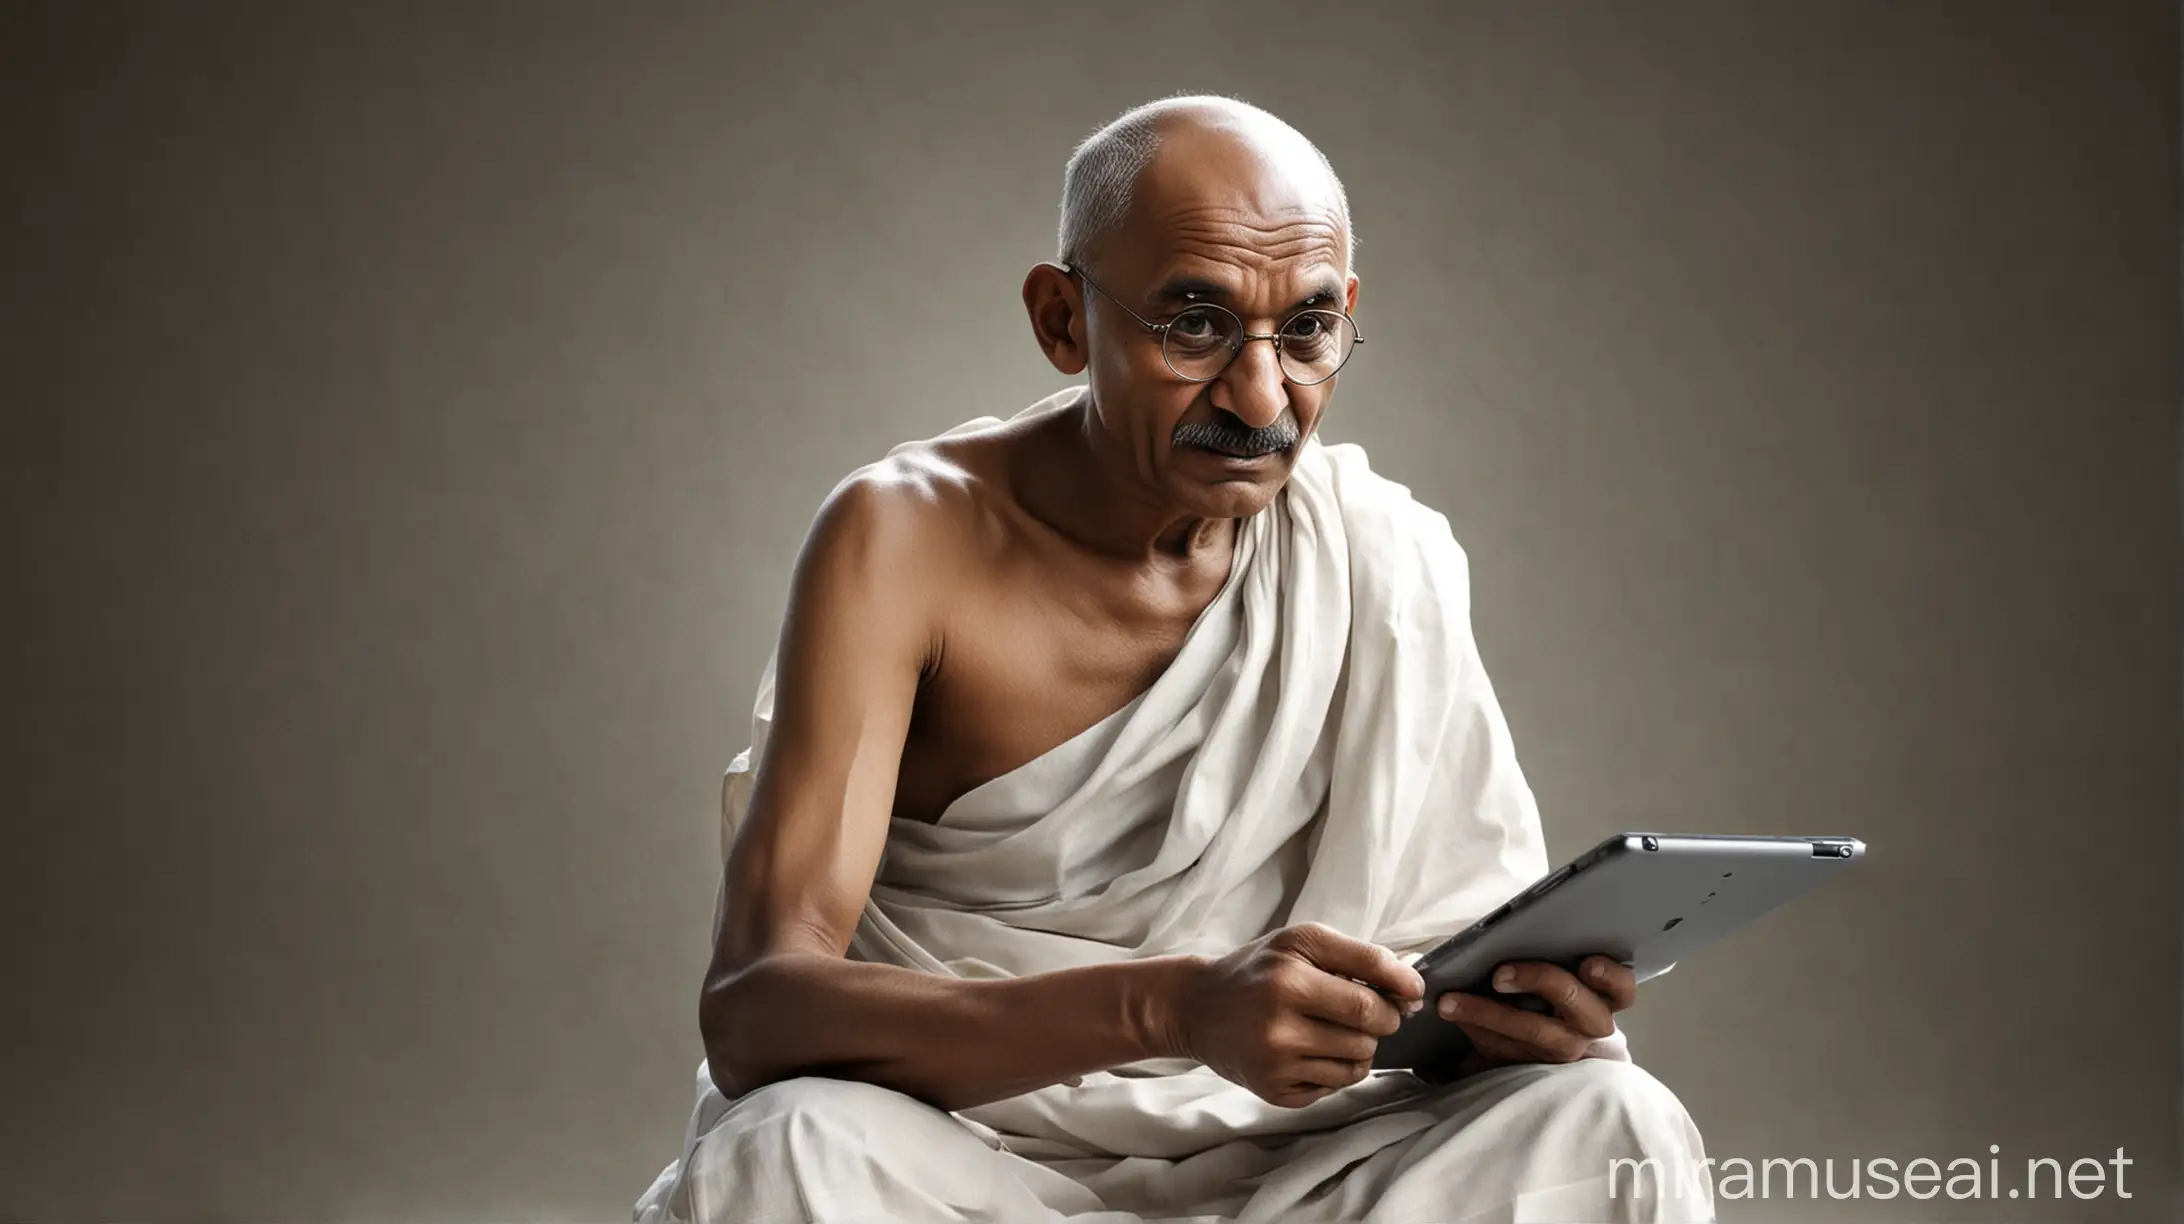 Create an image of Mahatma Gandhi using an Apple iPad, blending the iconic figure of Gandhi with modern technology